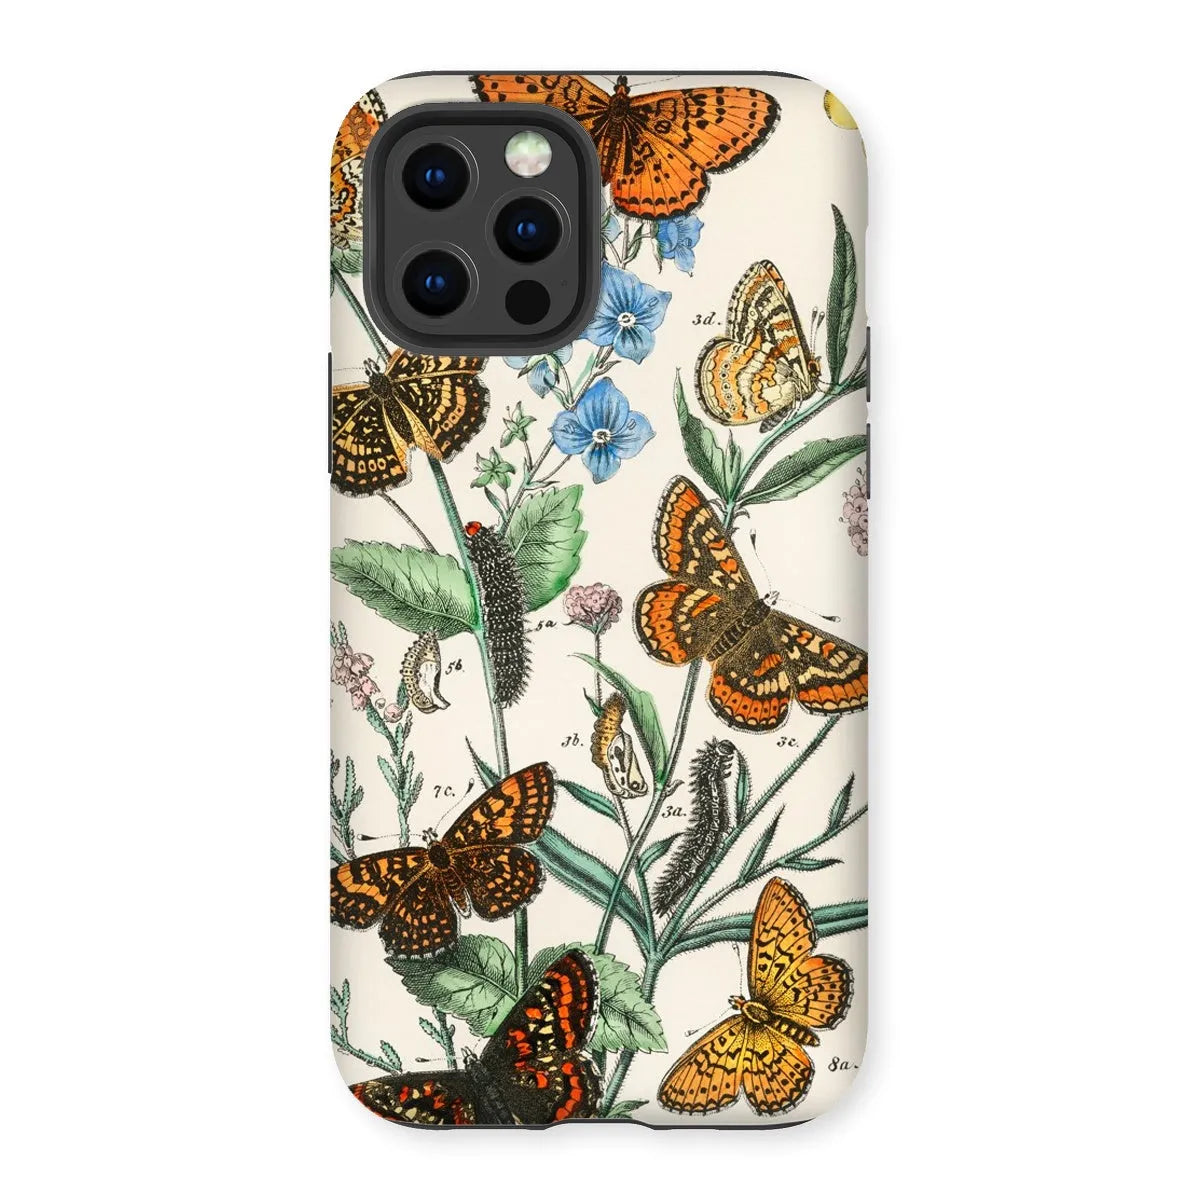 This Butterfly Aesthetic Art Phone Case - William Forsell Kirby - Iphone 12 Pro / Matte - Mobile Phone Cases